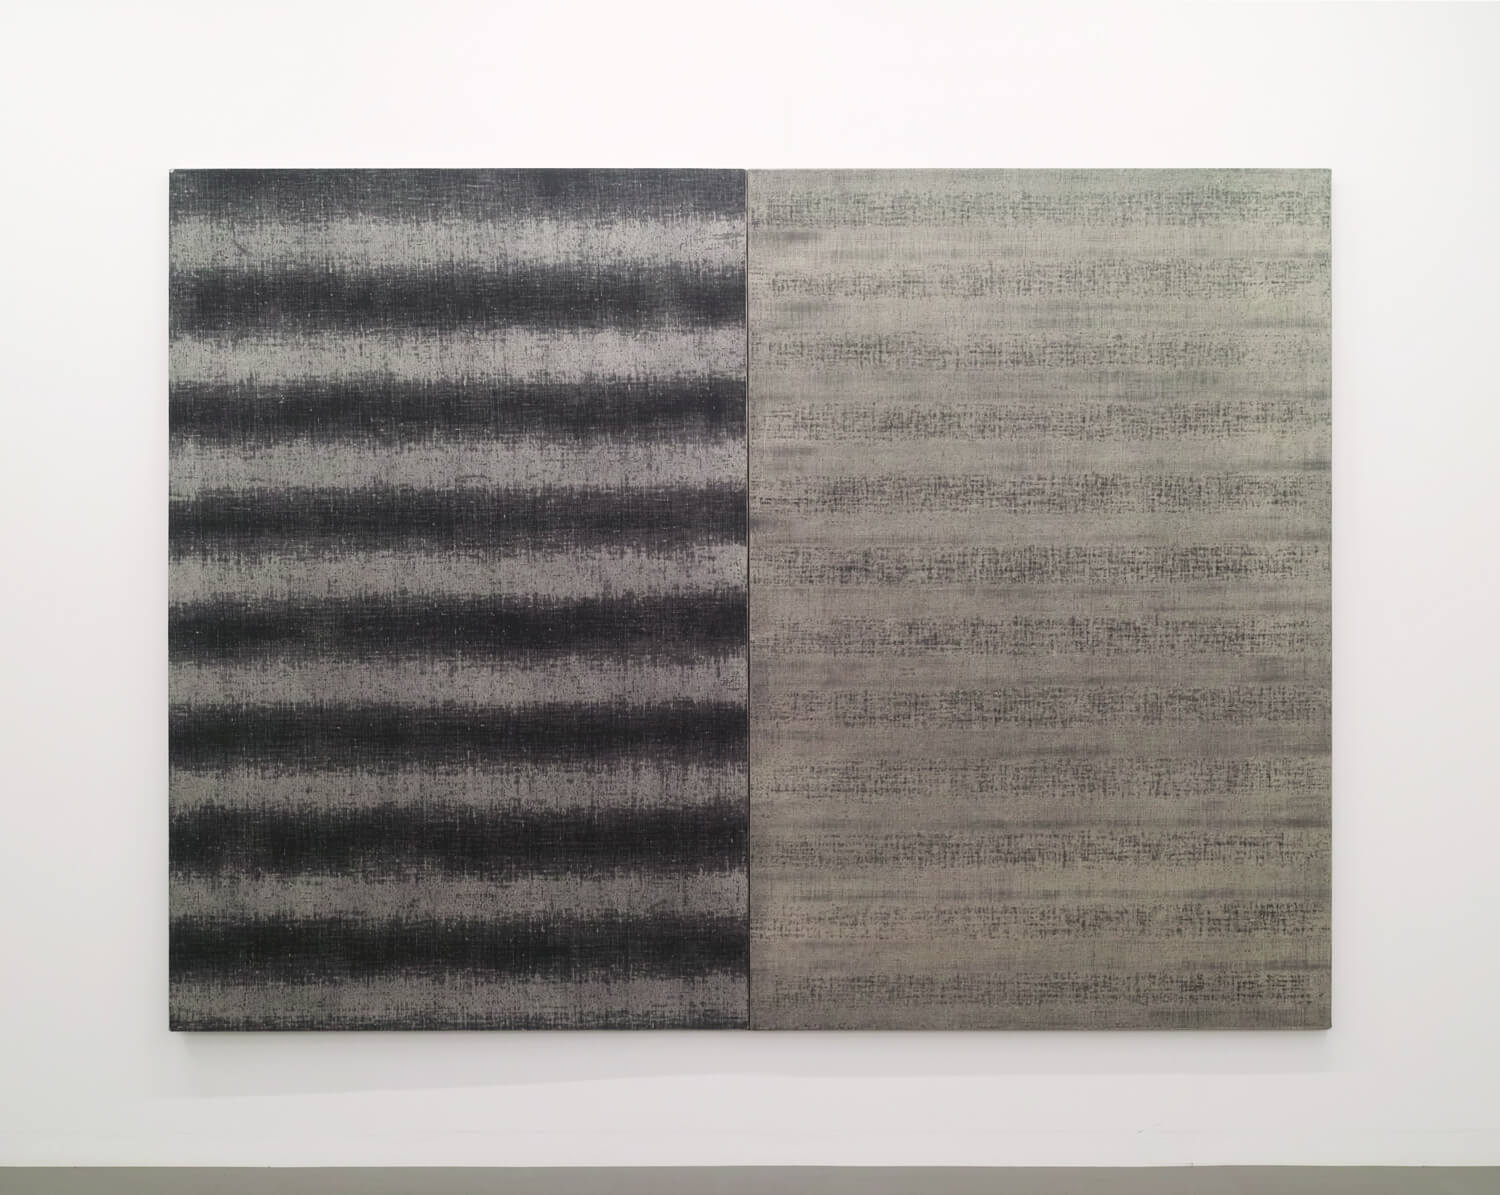 Drawing by drawing, Oil on canvas, 194 x 130 cm each (set of 2), 1979